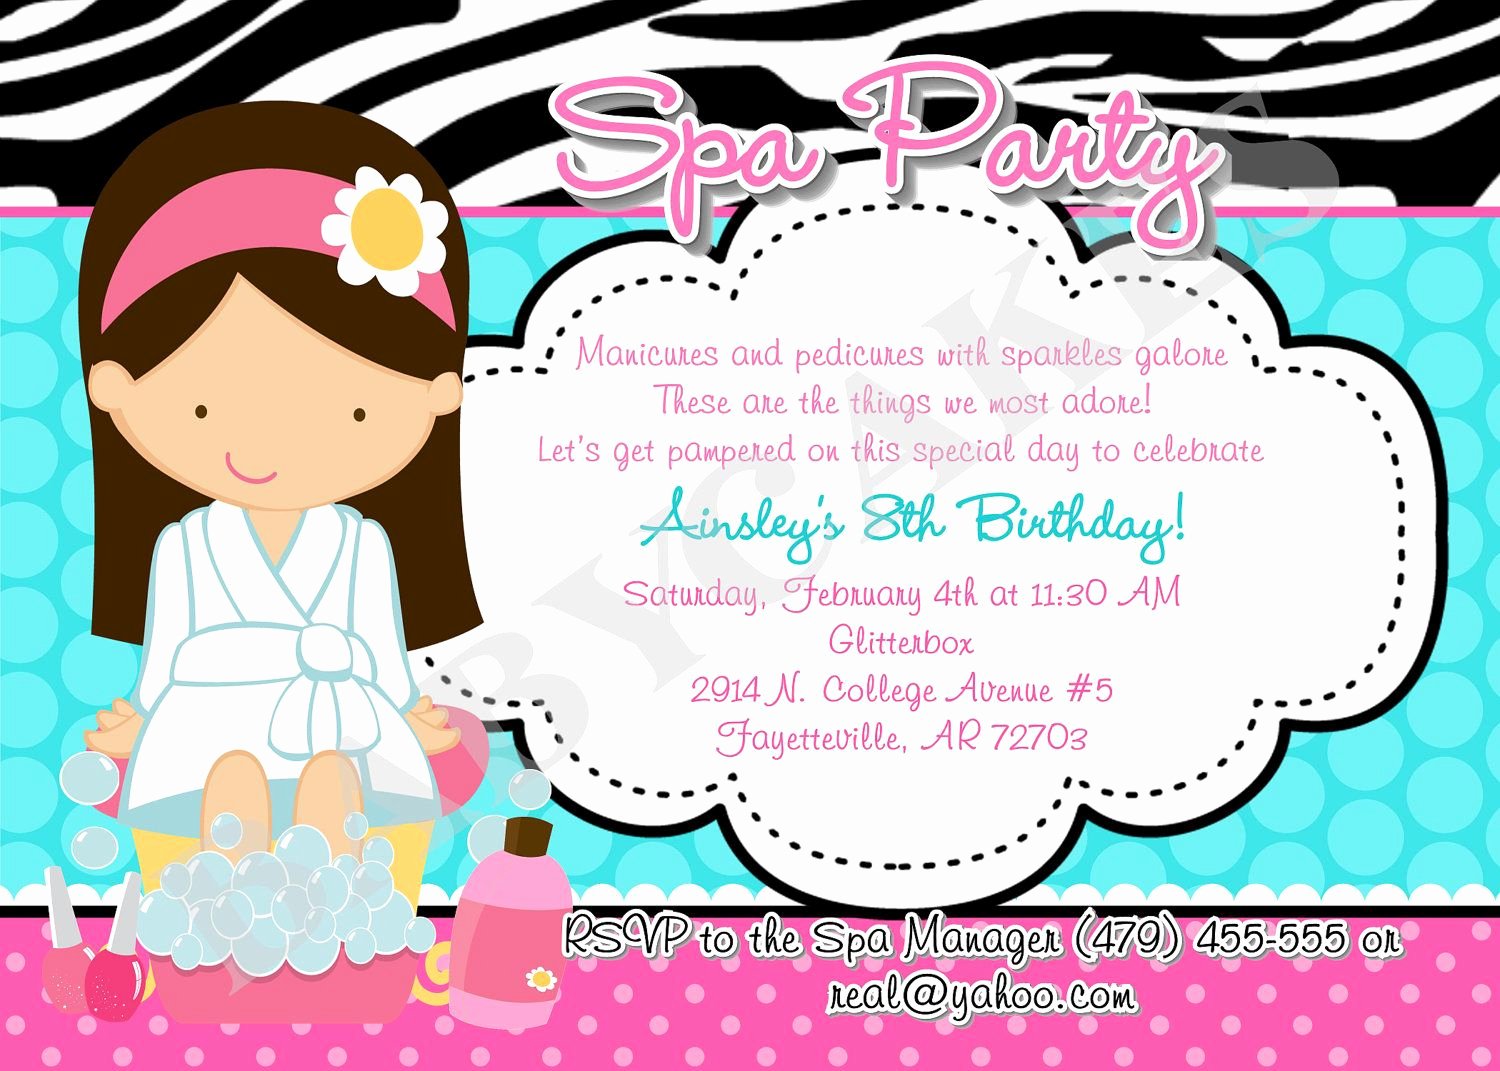 Spa Party Invitation Template Fresh Spa Party Invitation Birthday Diy Print Your Own